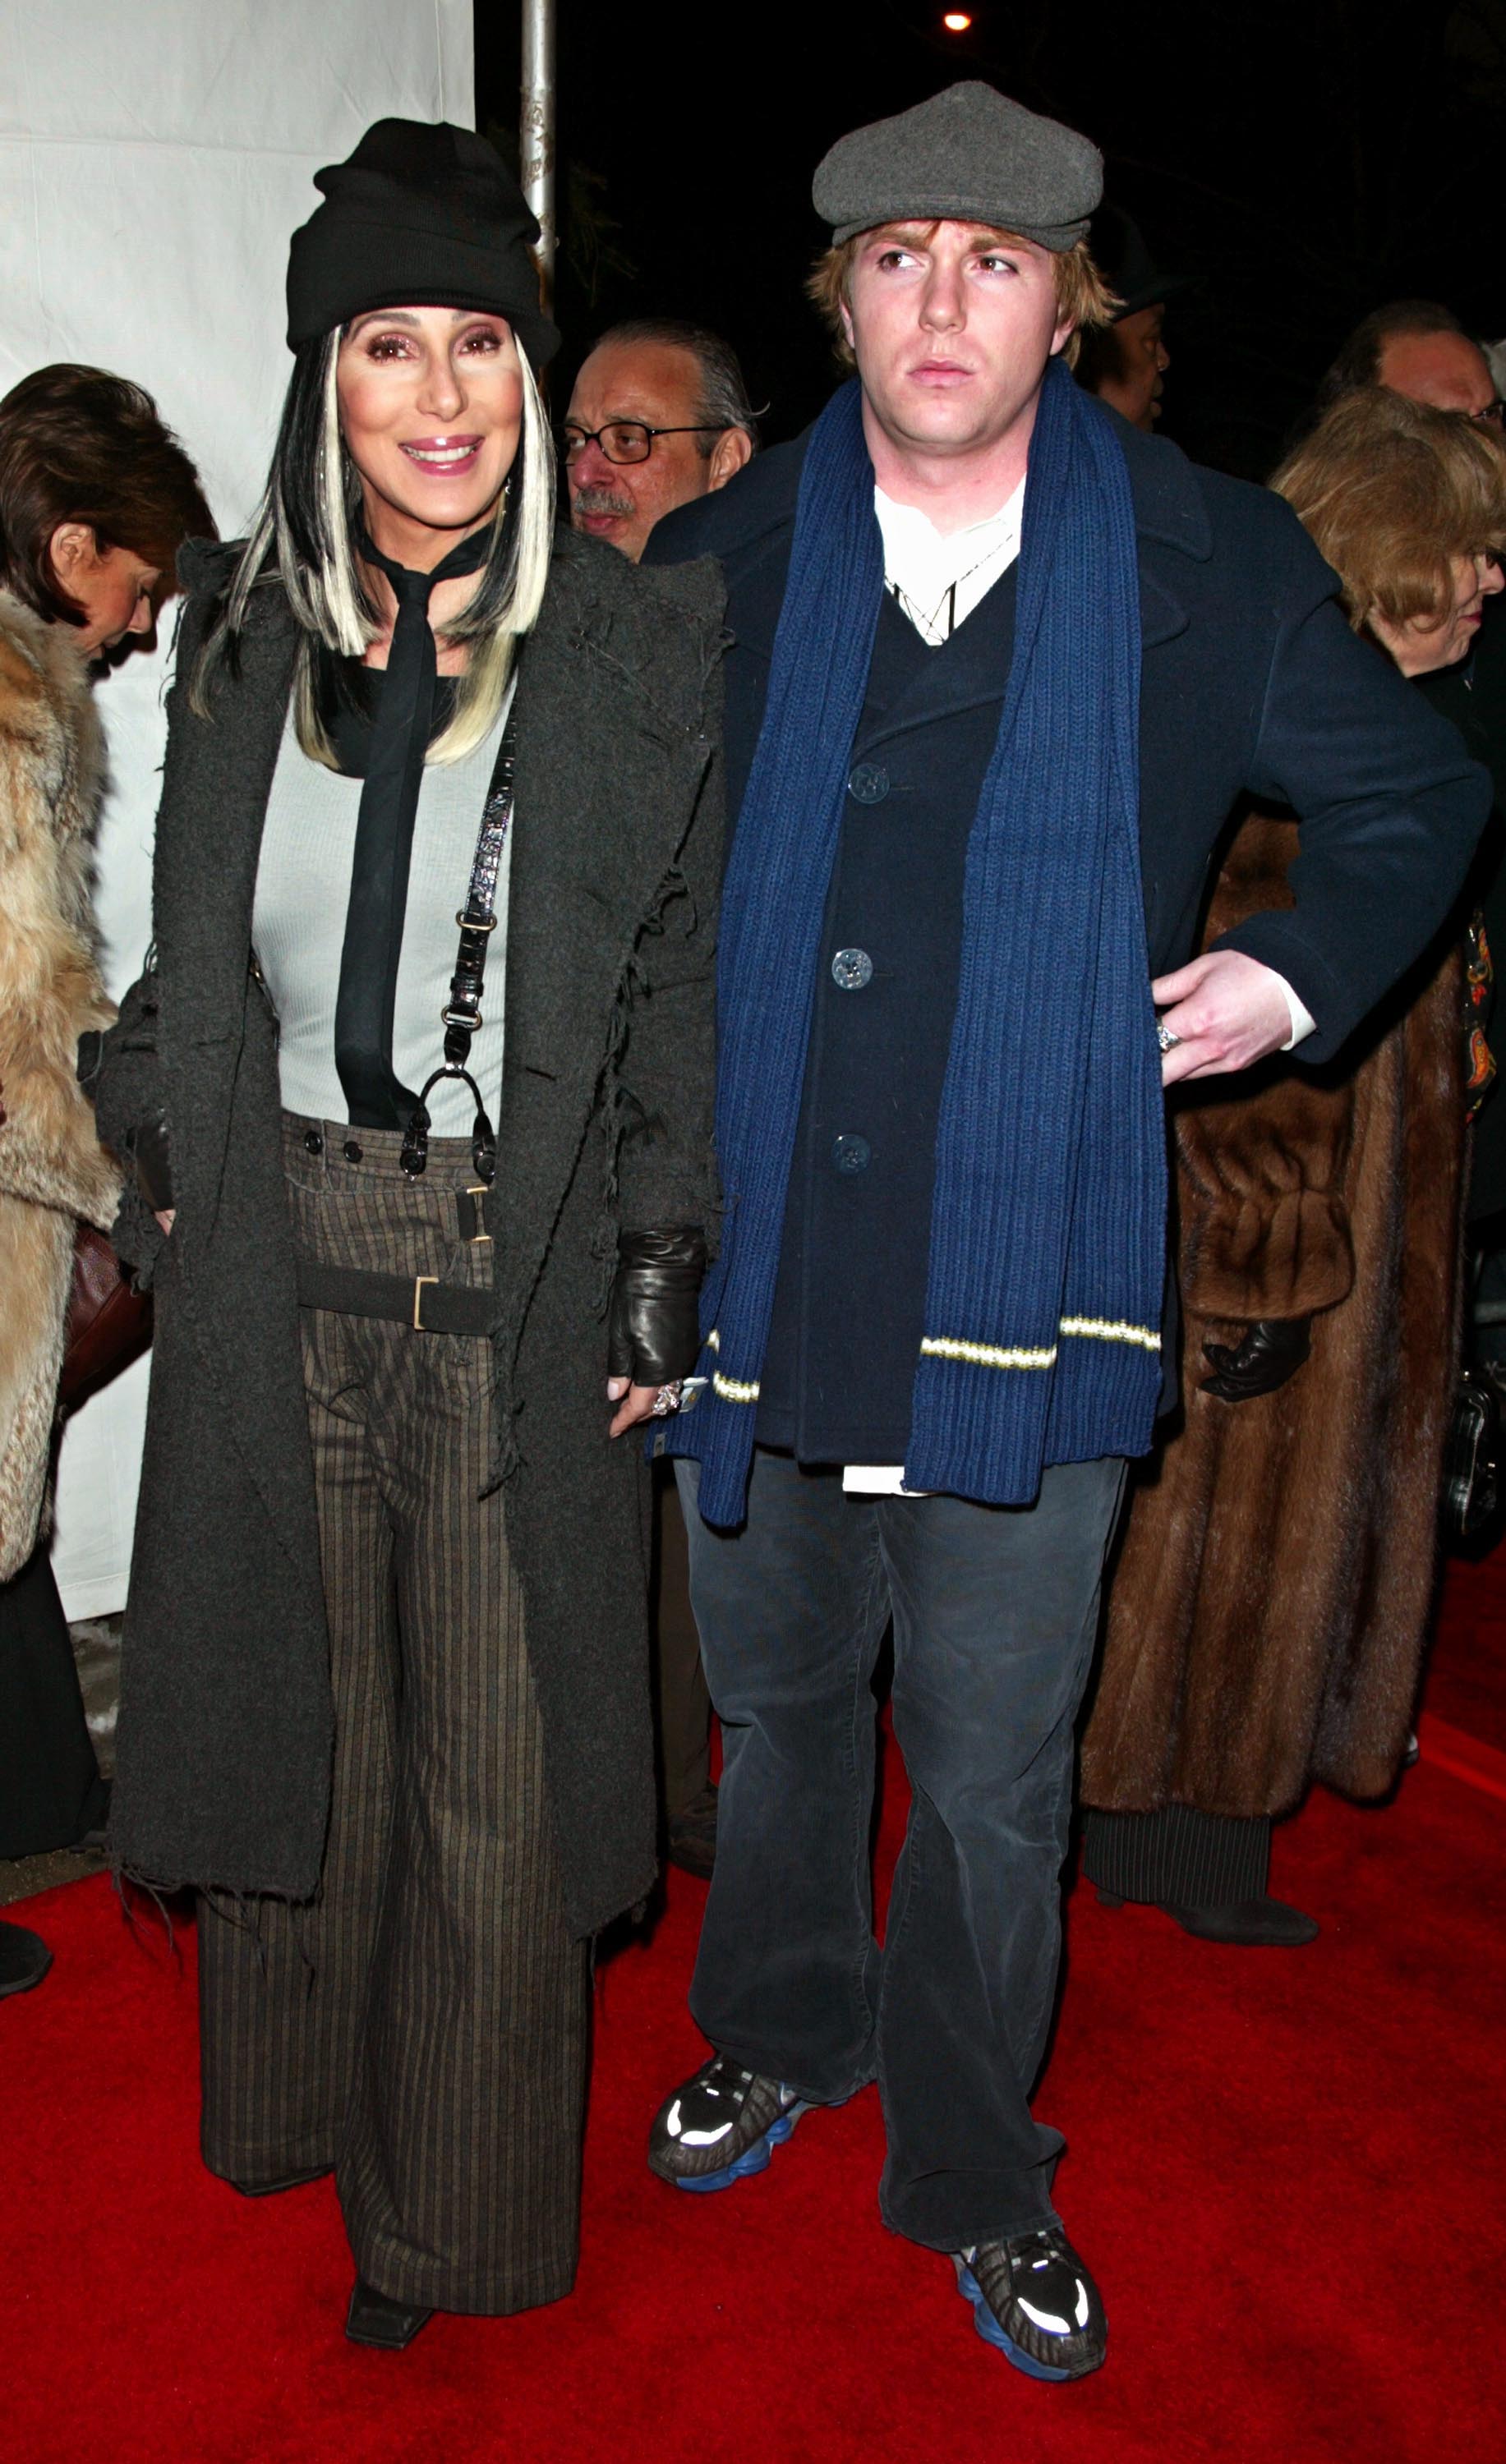 Cher and Eliaj Blue Allman at the premiere of "Stuck On You" in New York in 2003 | Source: Getty Images